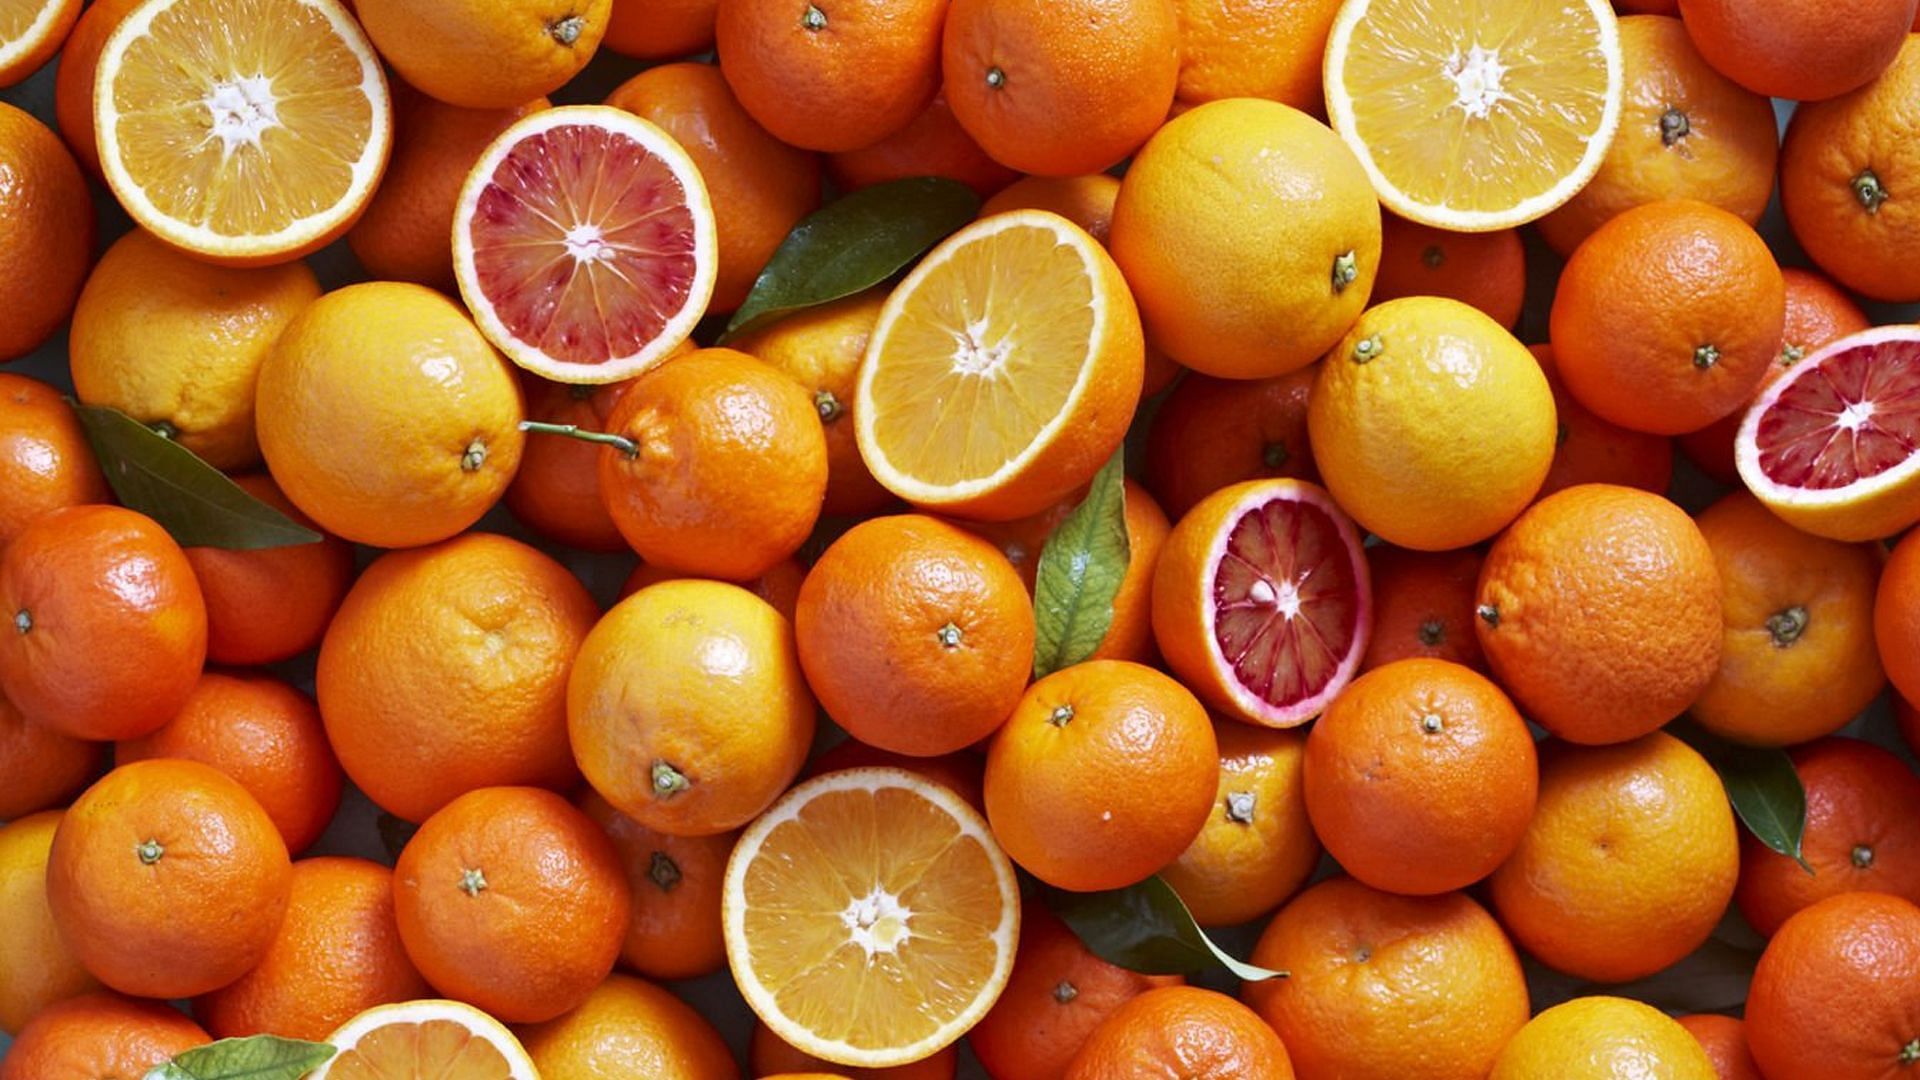 Eating oranges in the shower is a new trend going viral on TikTok (Image via Getty Images)